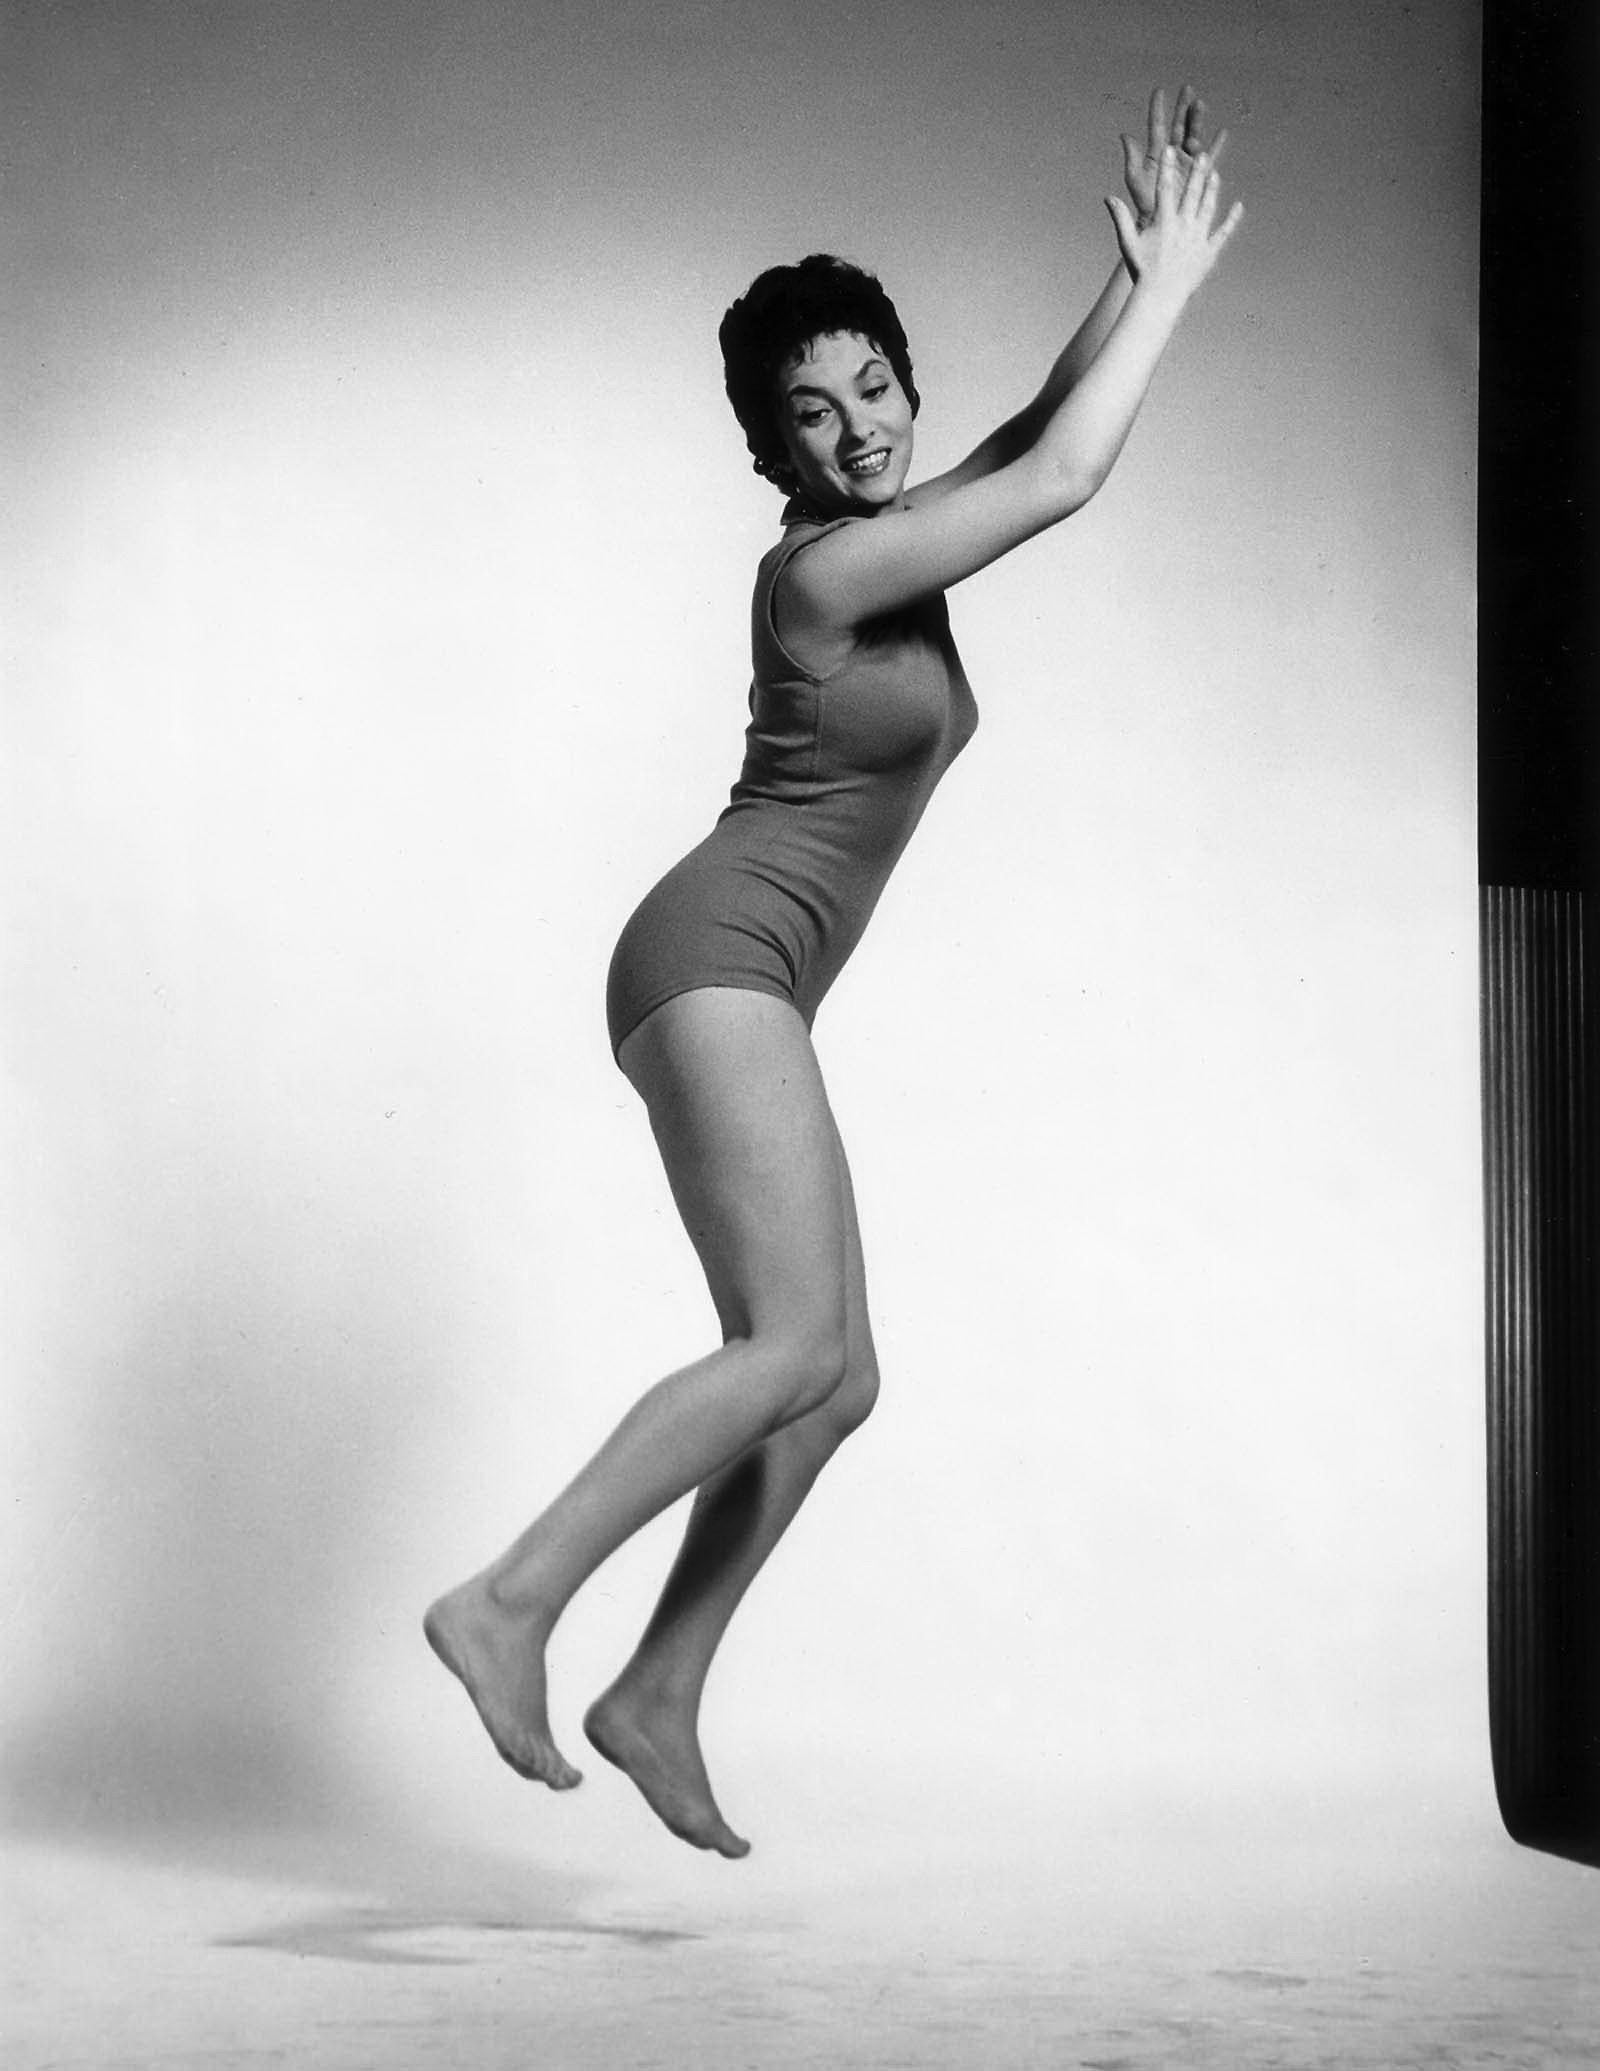 Philippe Halsman Black and White Photograph - Gina Lollobrigida Jumping, Black and White Vintage Photograph of Hollywood 1950s